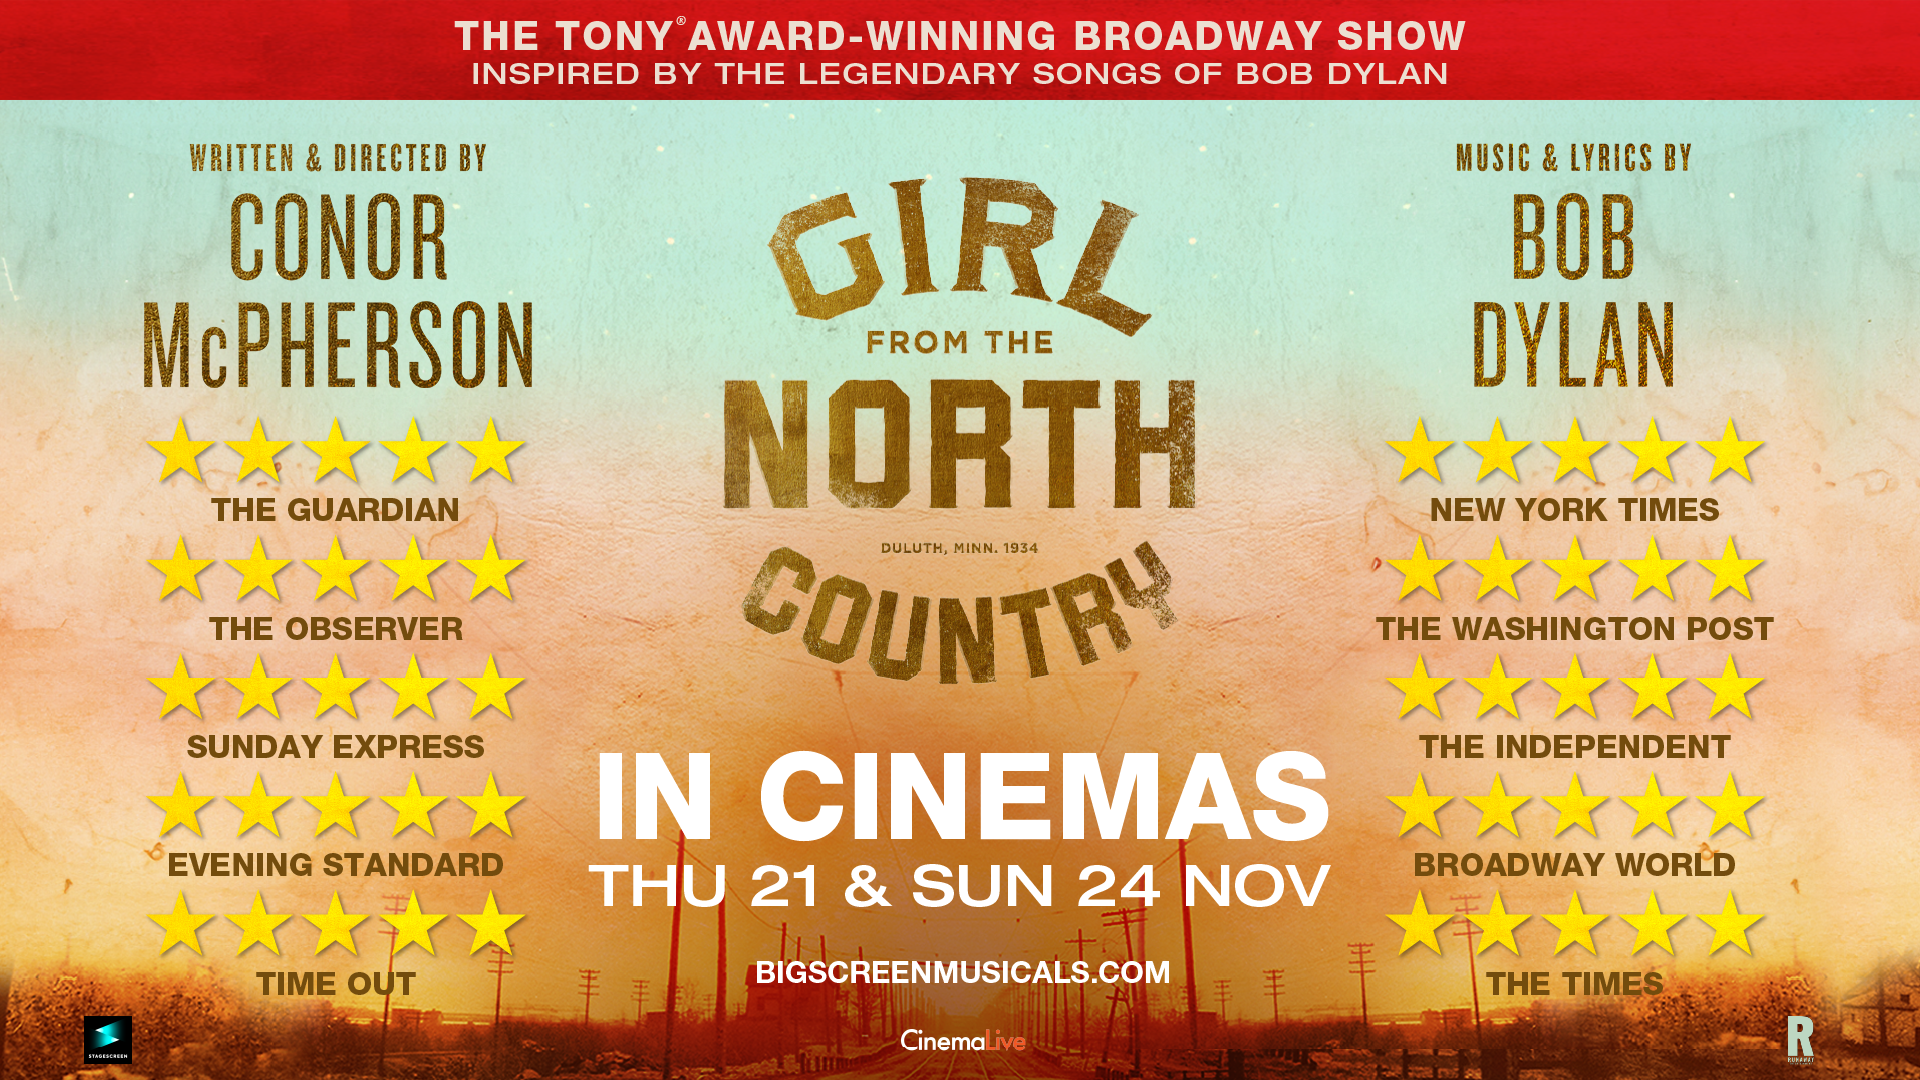 GIRL FROM THE NORTH COUNTRY - CINEMA LIVE